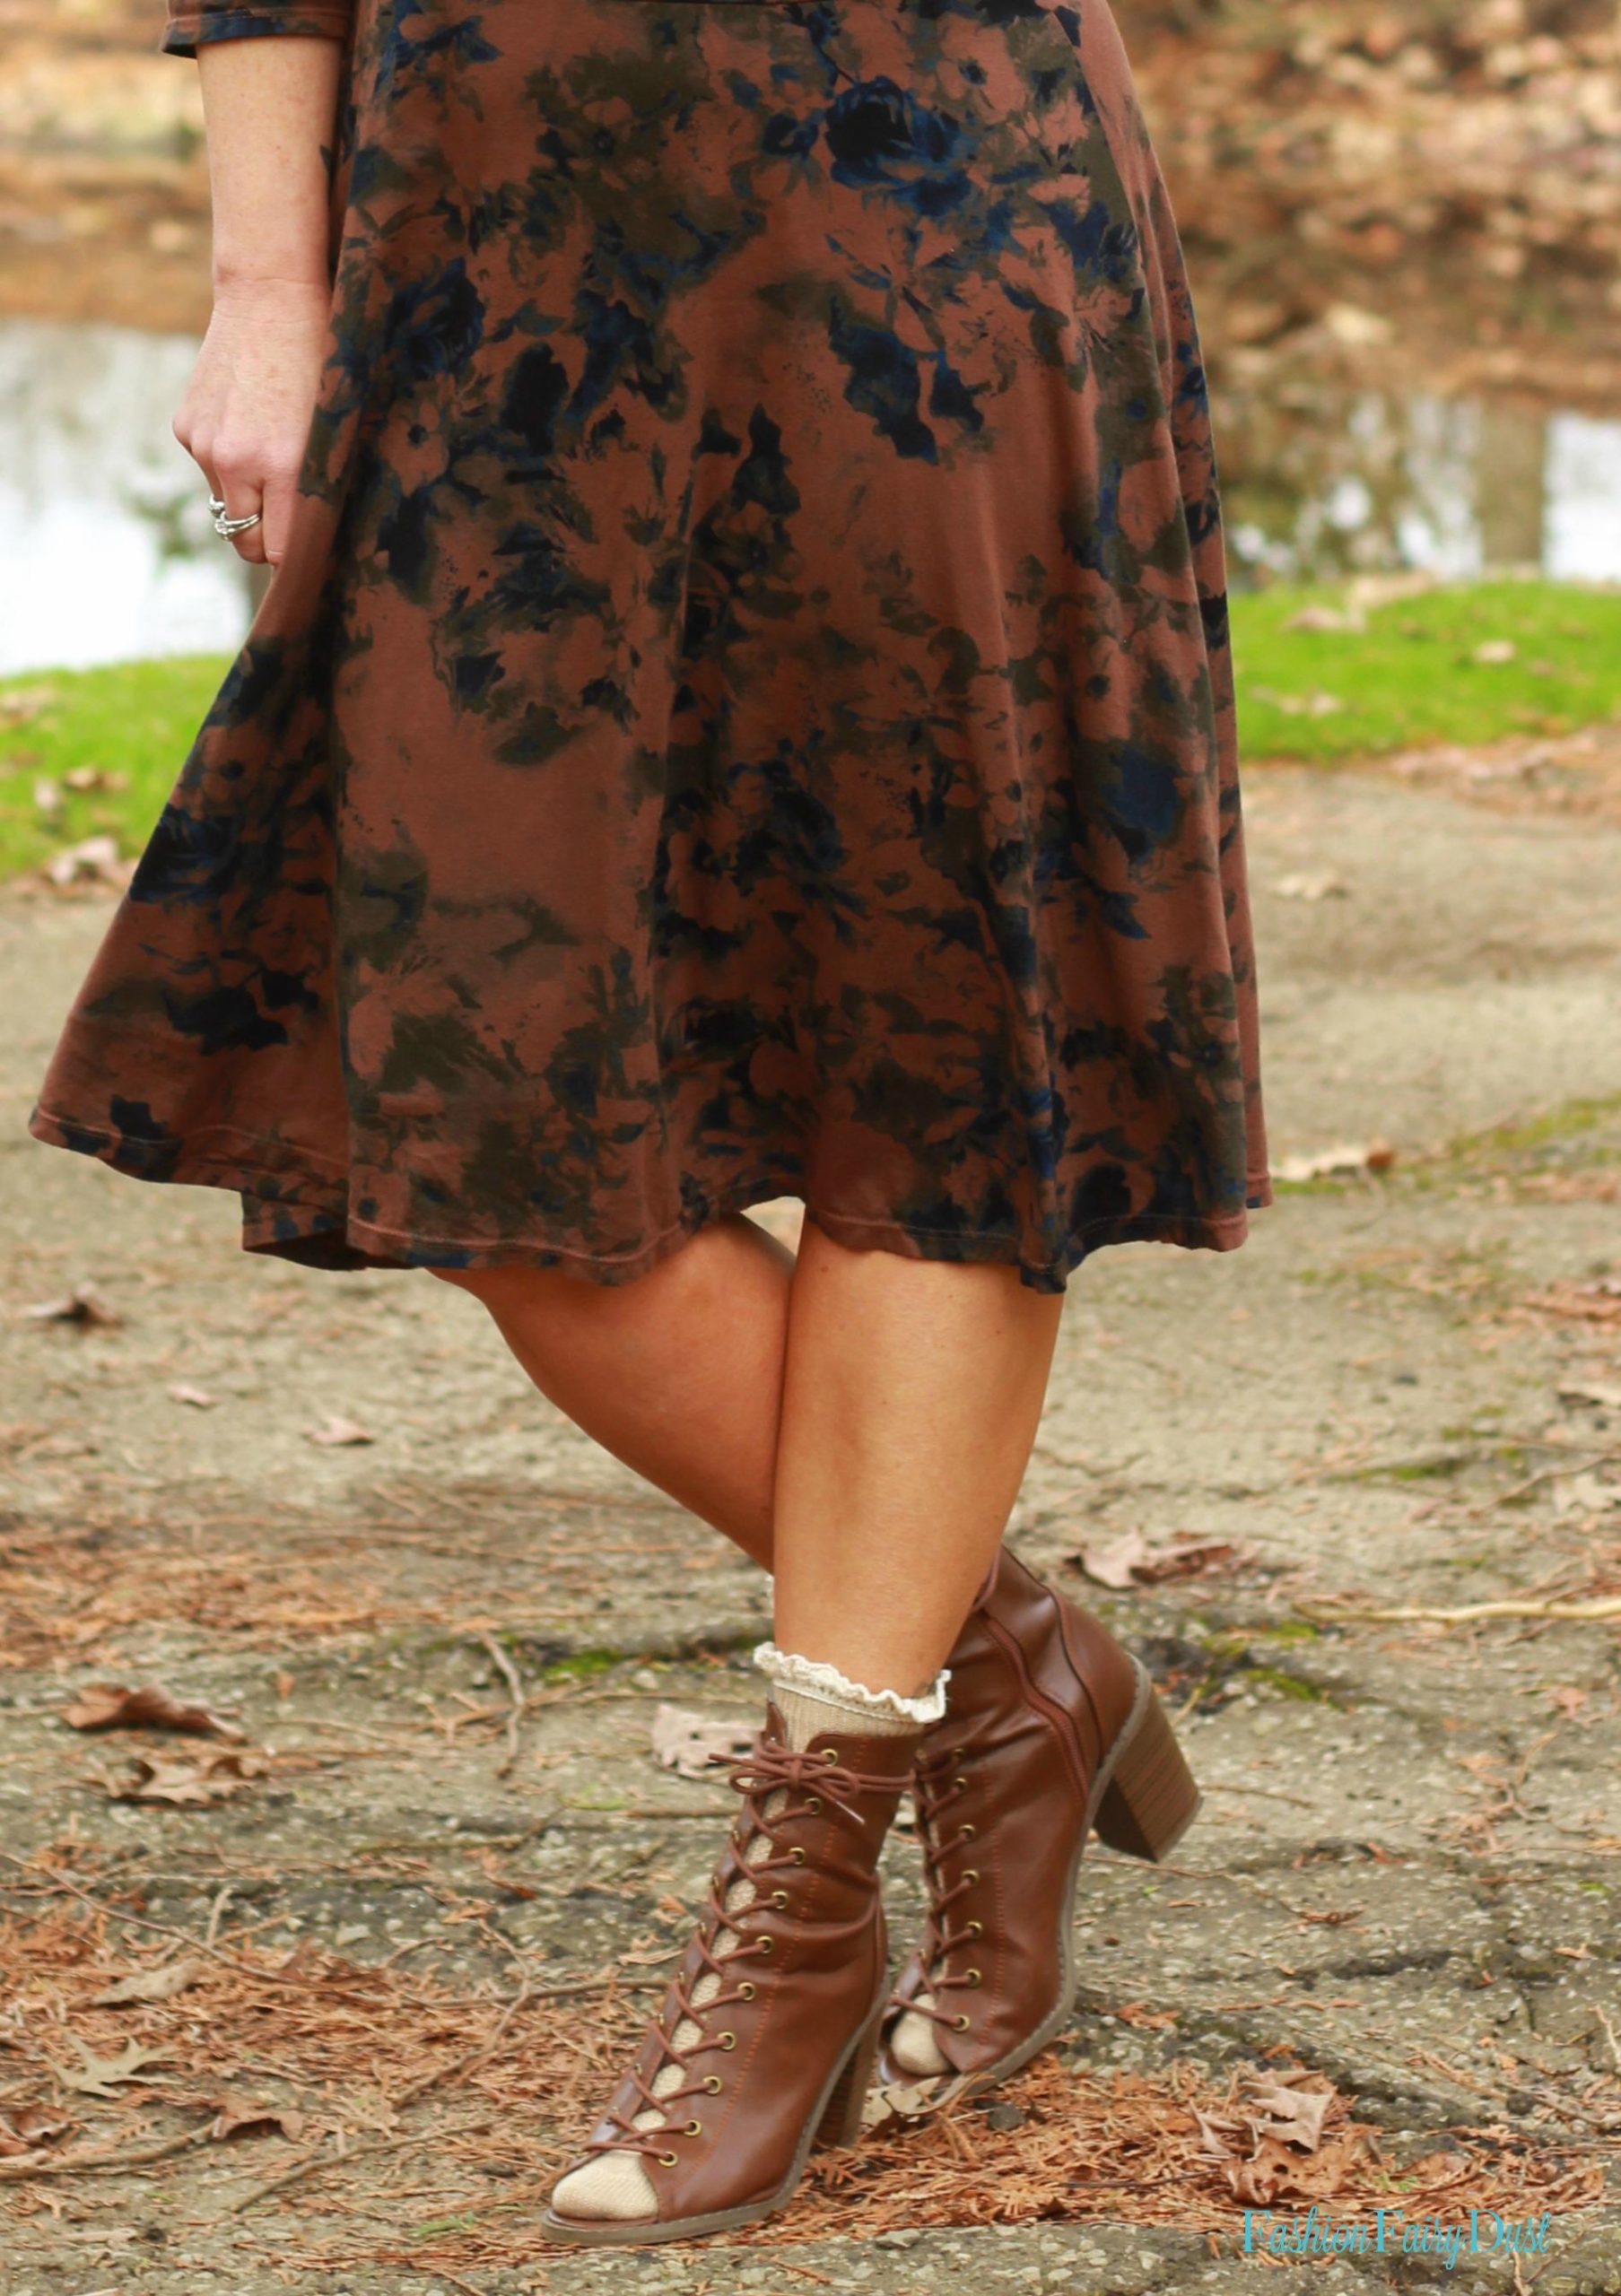 Floral print dress, peep toe ankle boots and socks. How to style open toe shoes with socks.